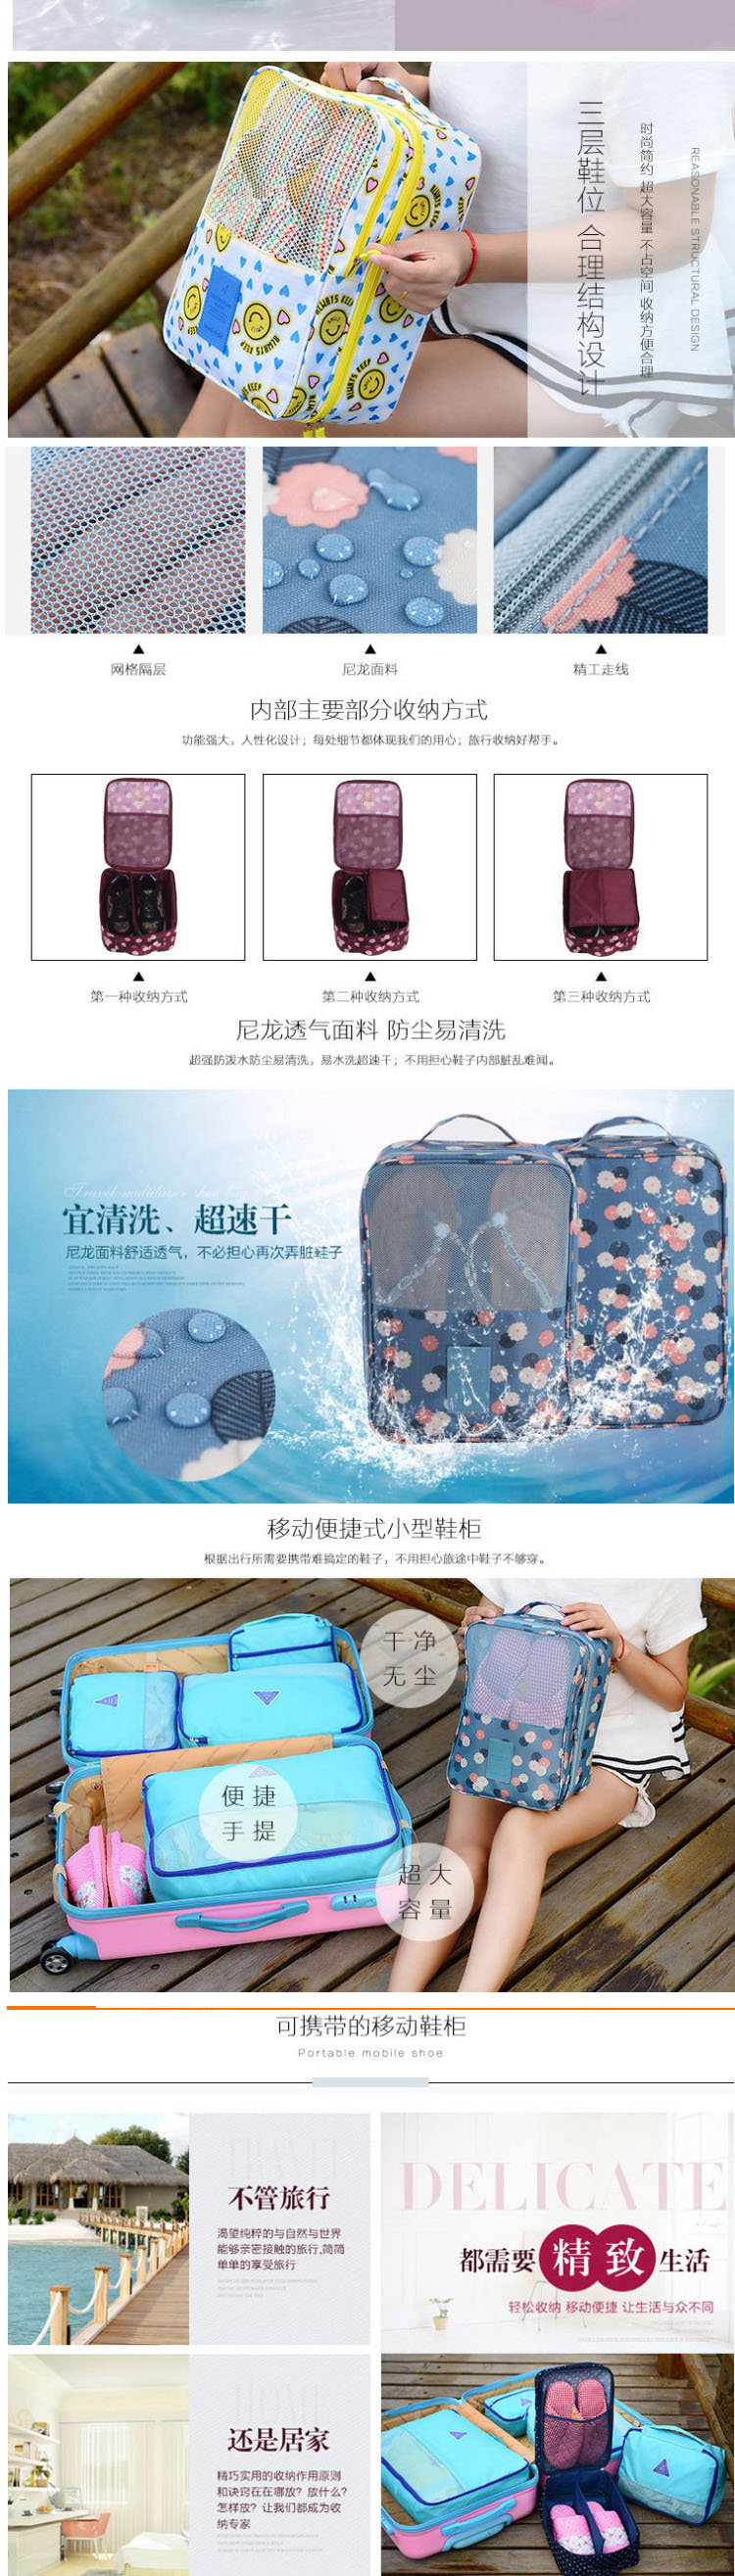 Traveling and receiving bags, packing shoes and shoes bag travel necessary luggage suitcase waterproof shoe bag shoe box three generation shoe bag4